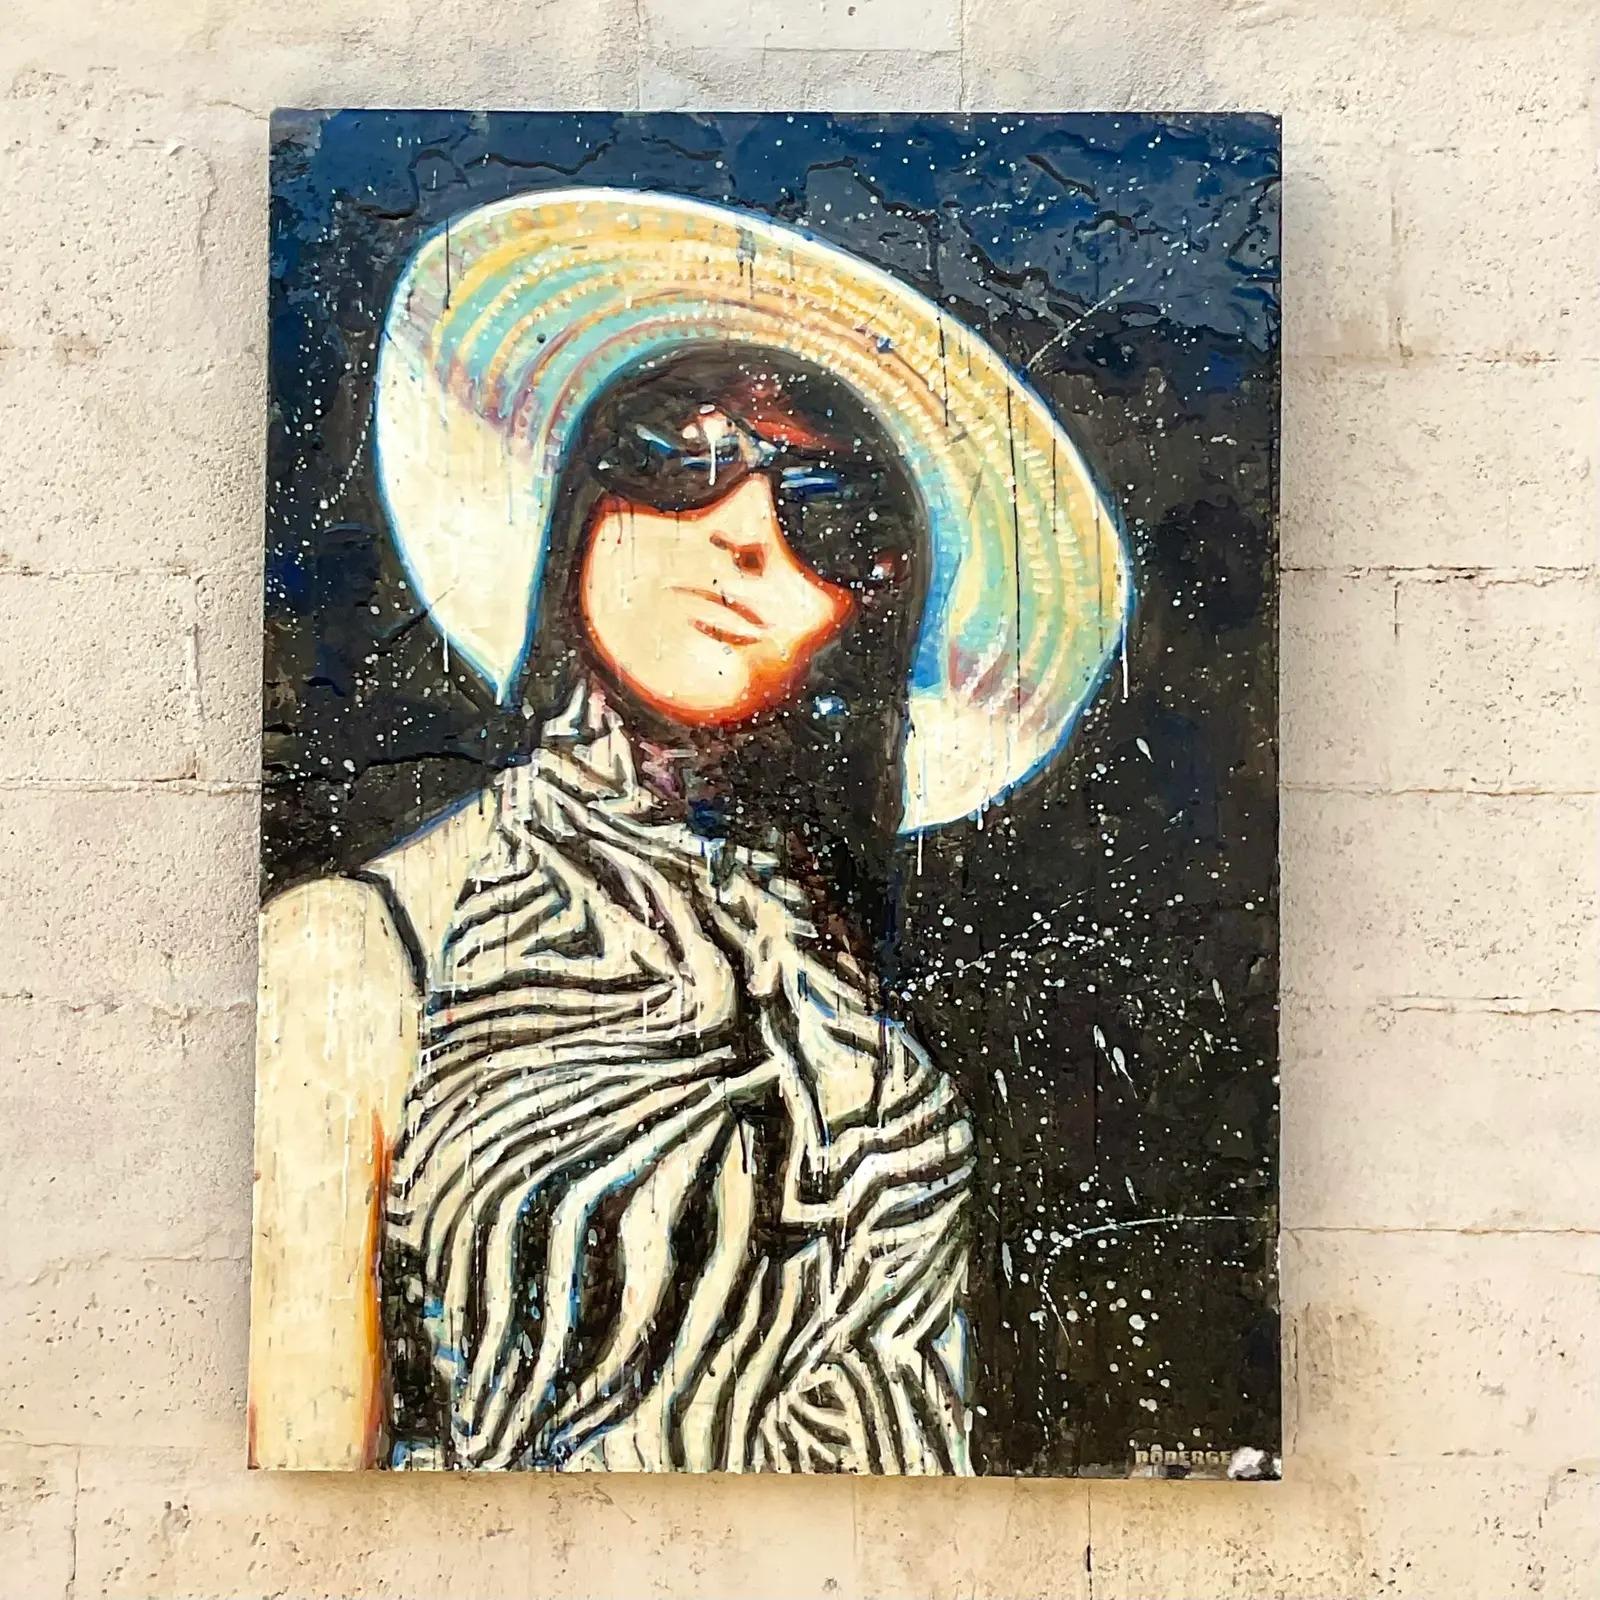 Vintage Signed Sylvan Roberge Encaustic & Pigmented Wax Painting of Young Woman In Good Condition For Sale In west palm beach, FL